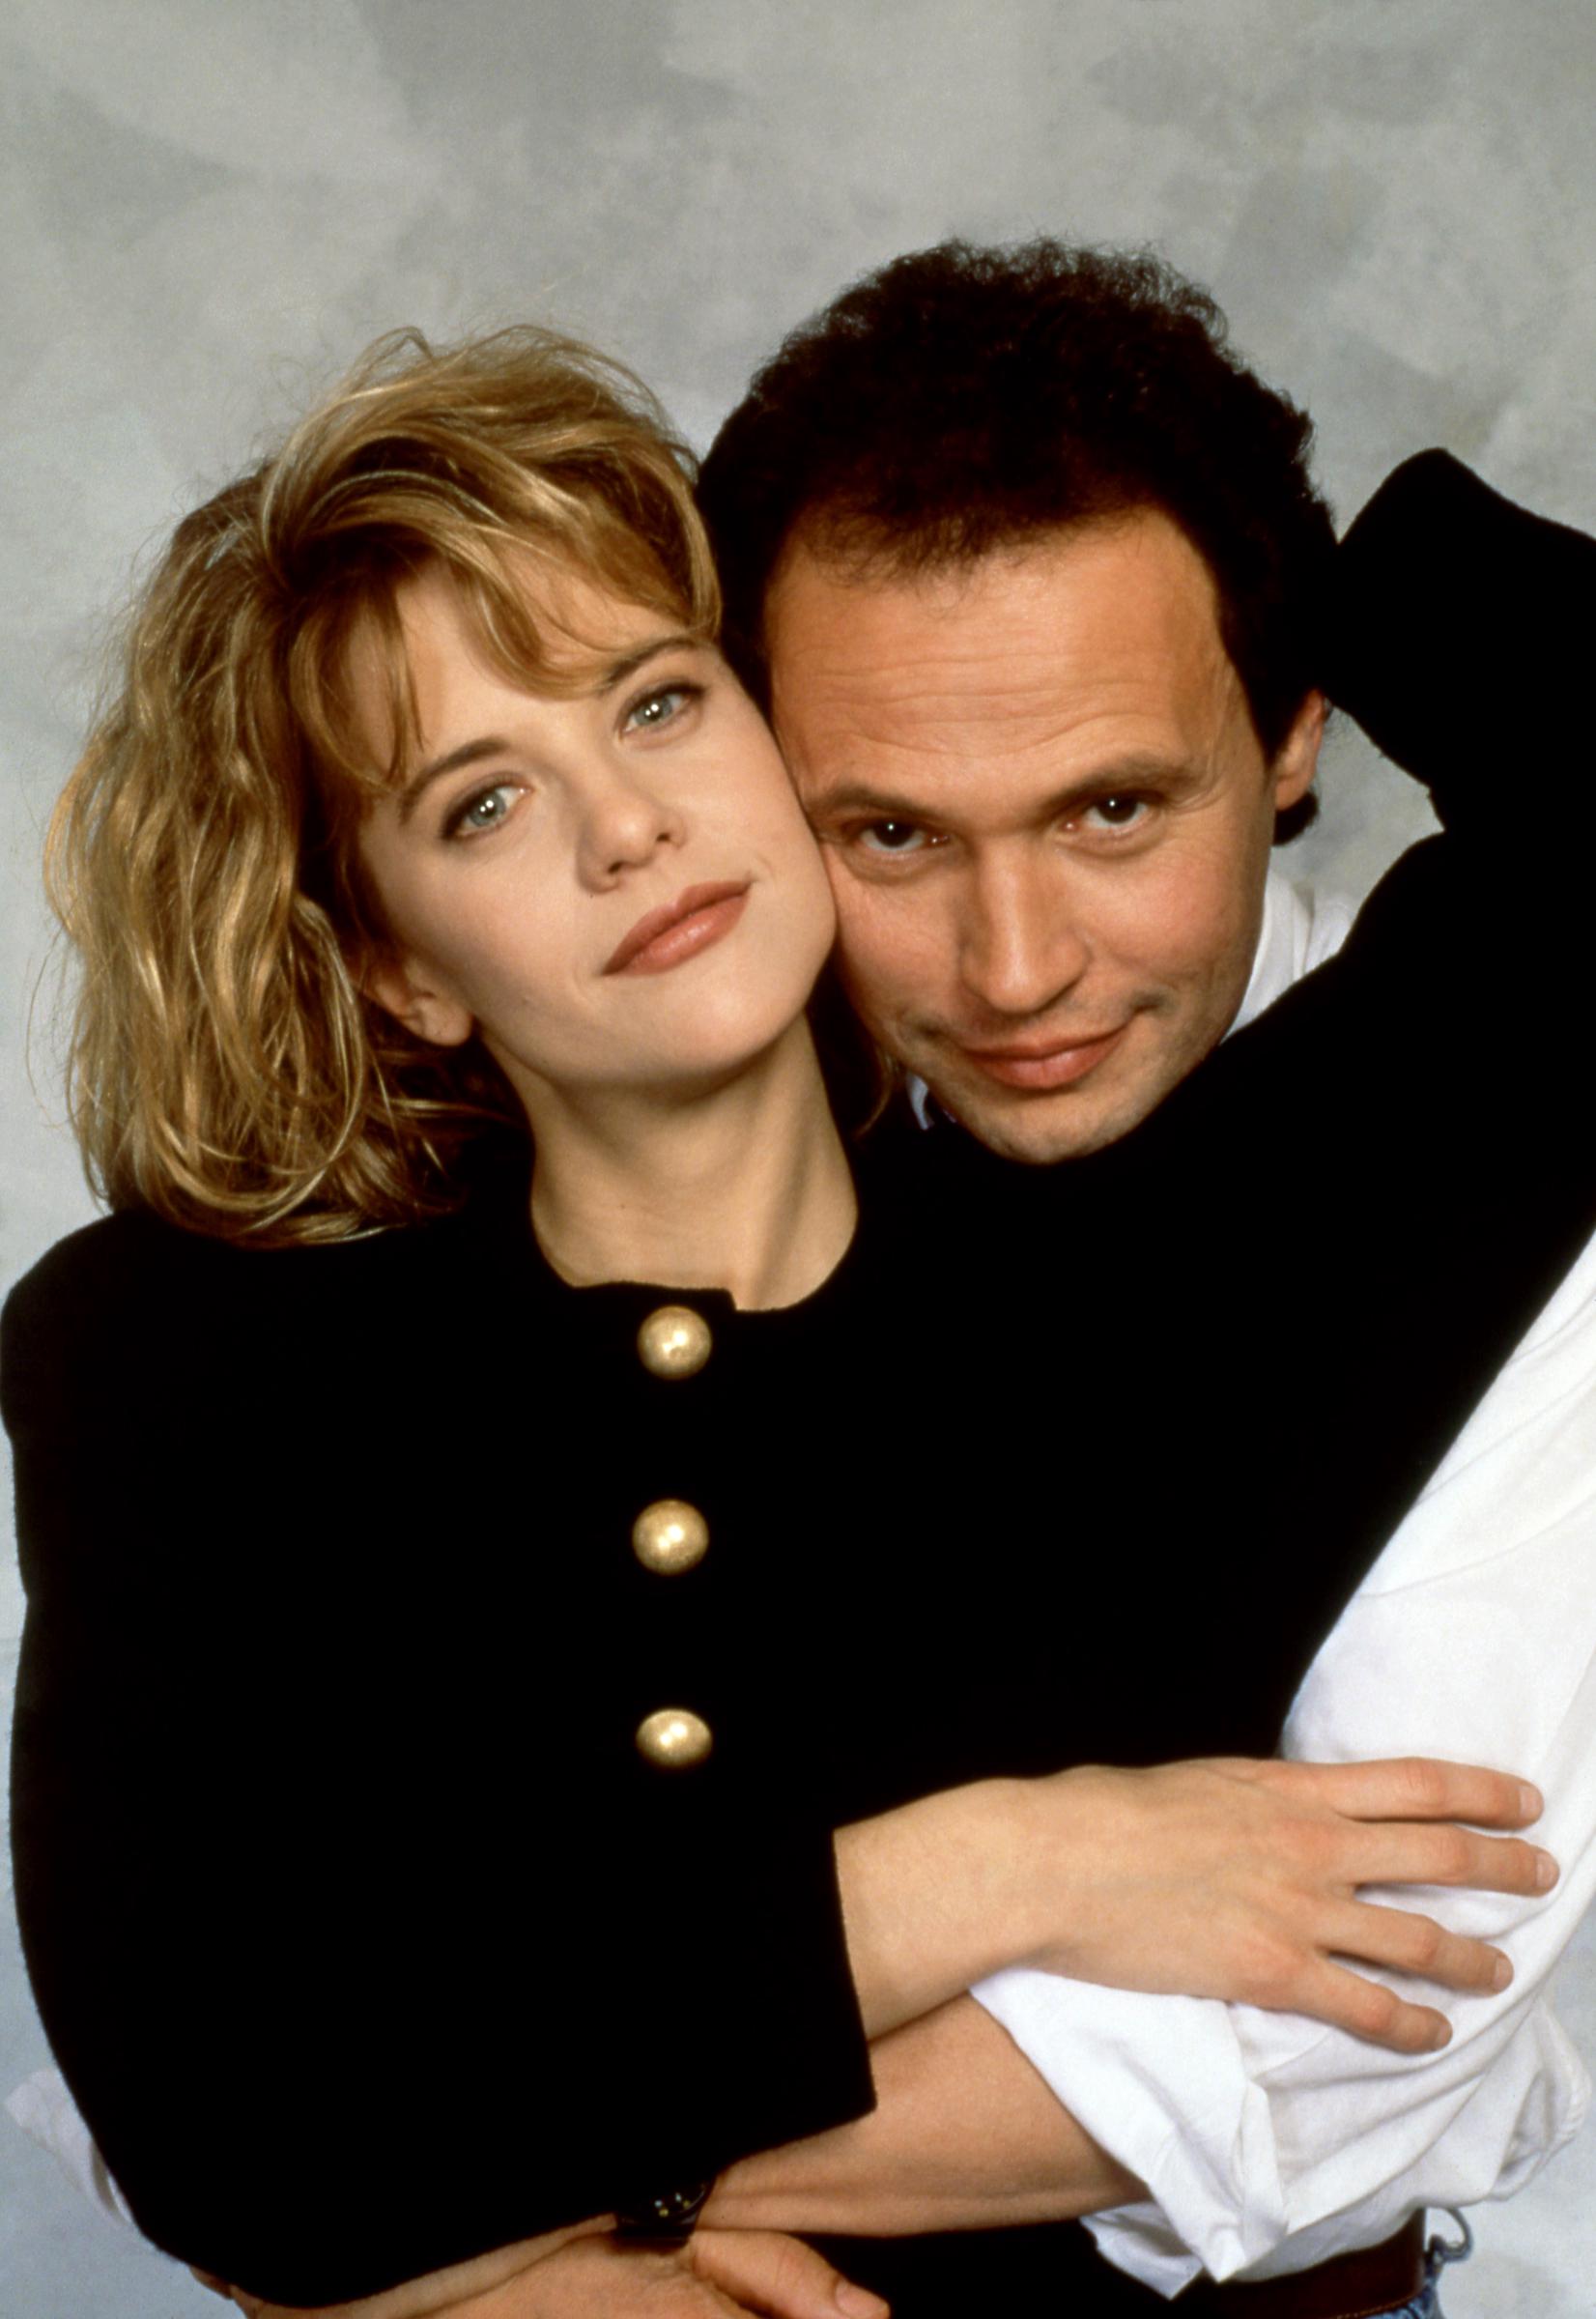 Meg Ryan and Billy Crystal pose for a portrait on January 1, 1989 in Los Angeles, California. | Source: Getty Images